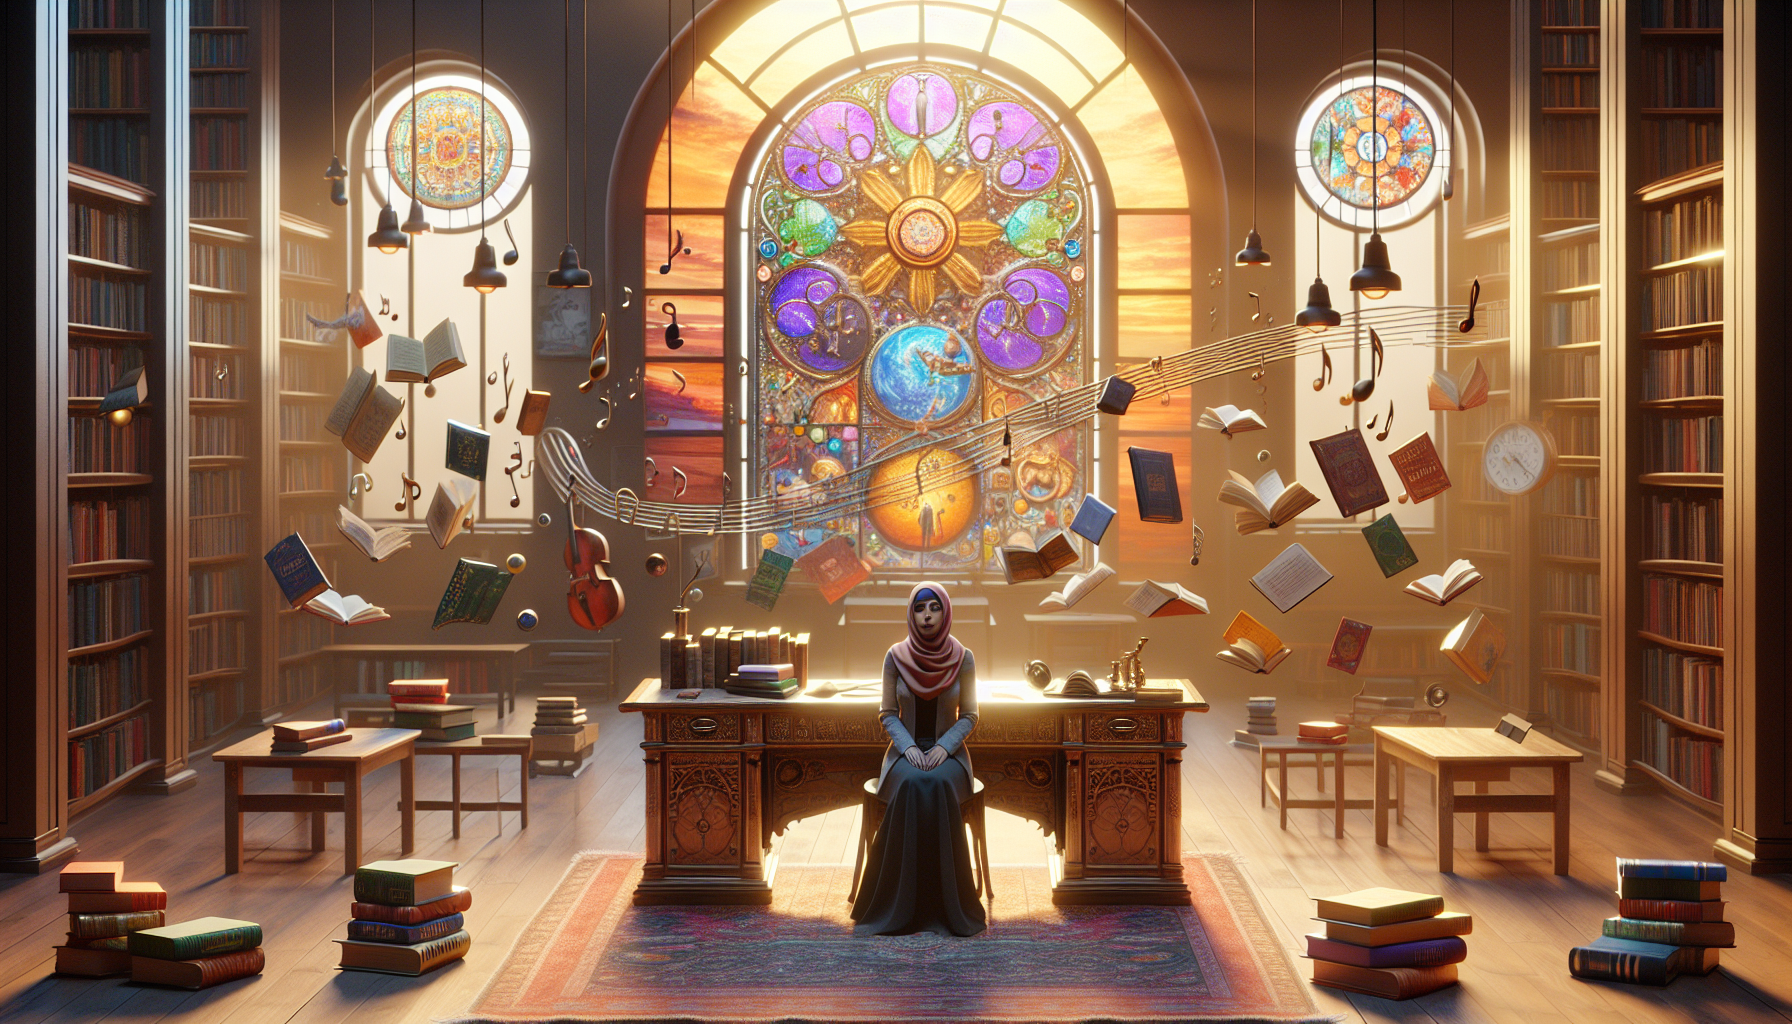 A whimsical library setting where an author sits at a large, old wooden desk, surrounded by floating musical notes and colorful book spines, each labeled with different literary genres like sci-fi, ro